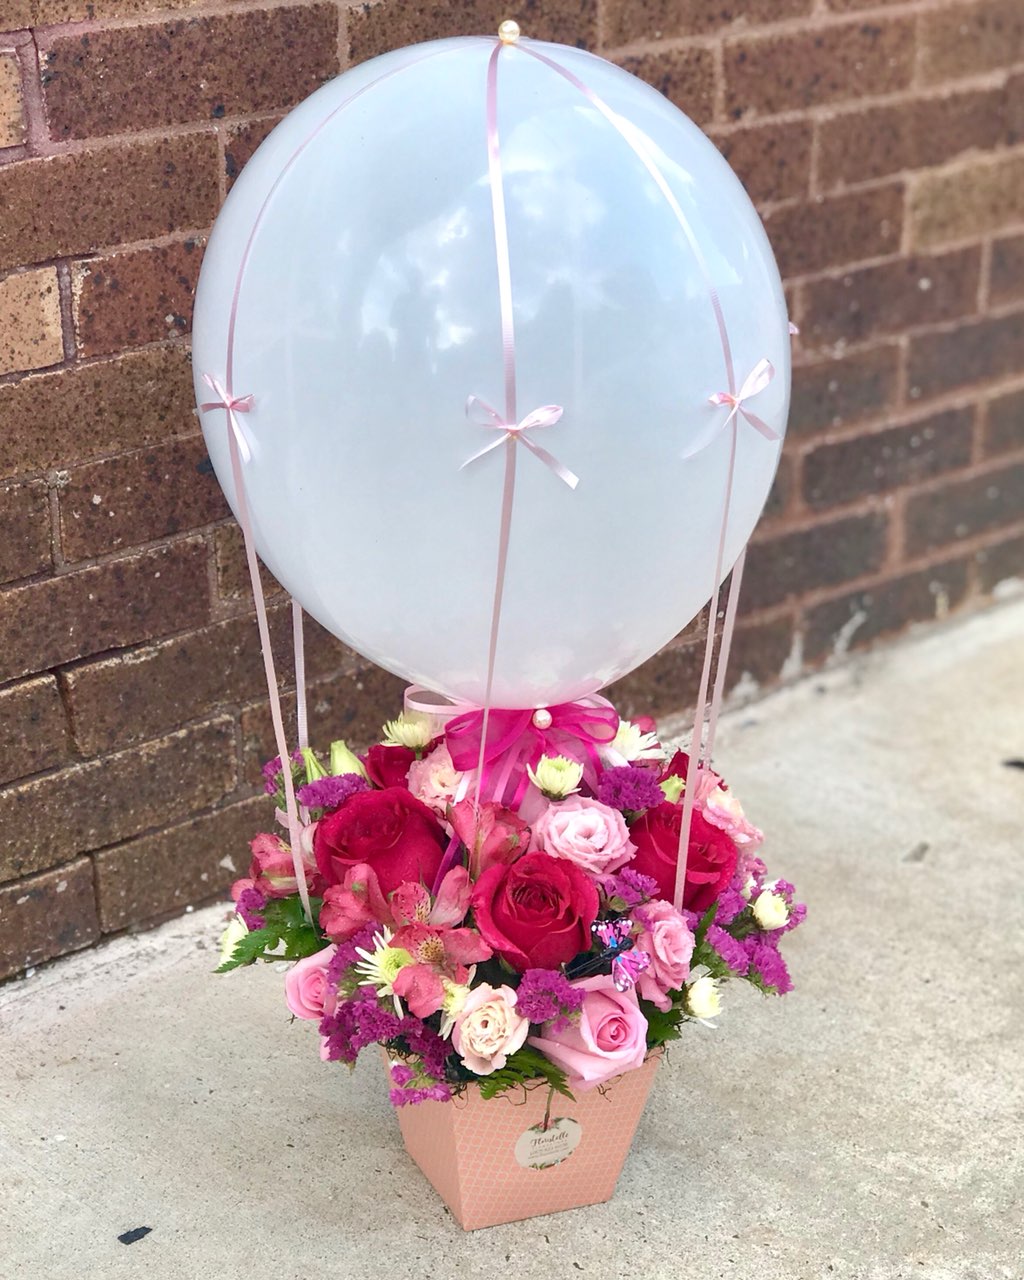 Welcome the newest little cutie into the world with this pink-tastic box. Decorated like air balloon, it's a darling little bundle - just like her.  Includes:  Pink roses, pink alstroemerias, white daisies, pink lisianthus, assorted greens. Balloon Floral box Free message card